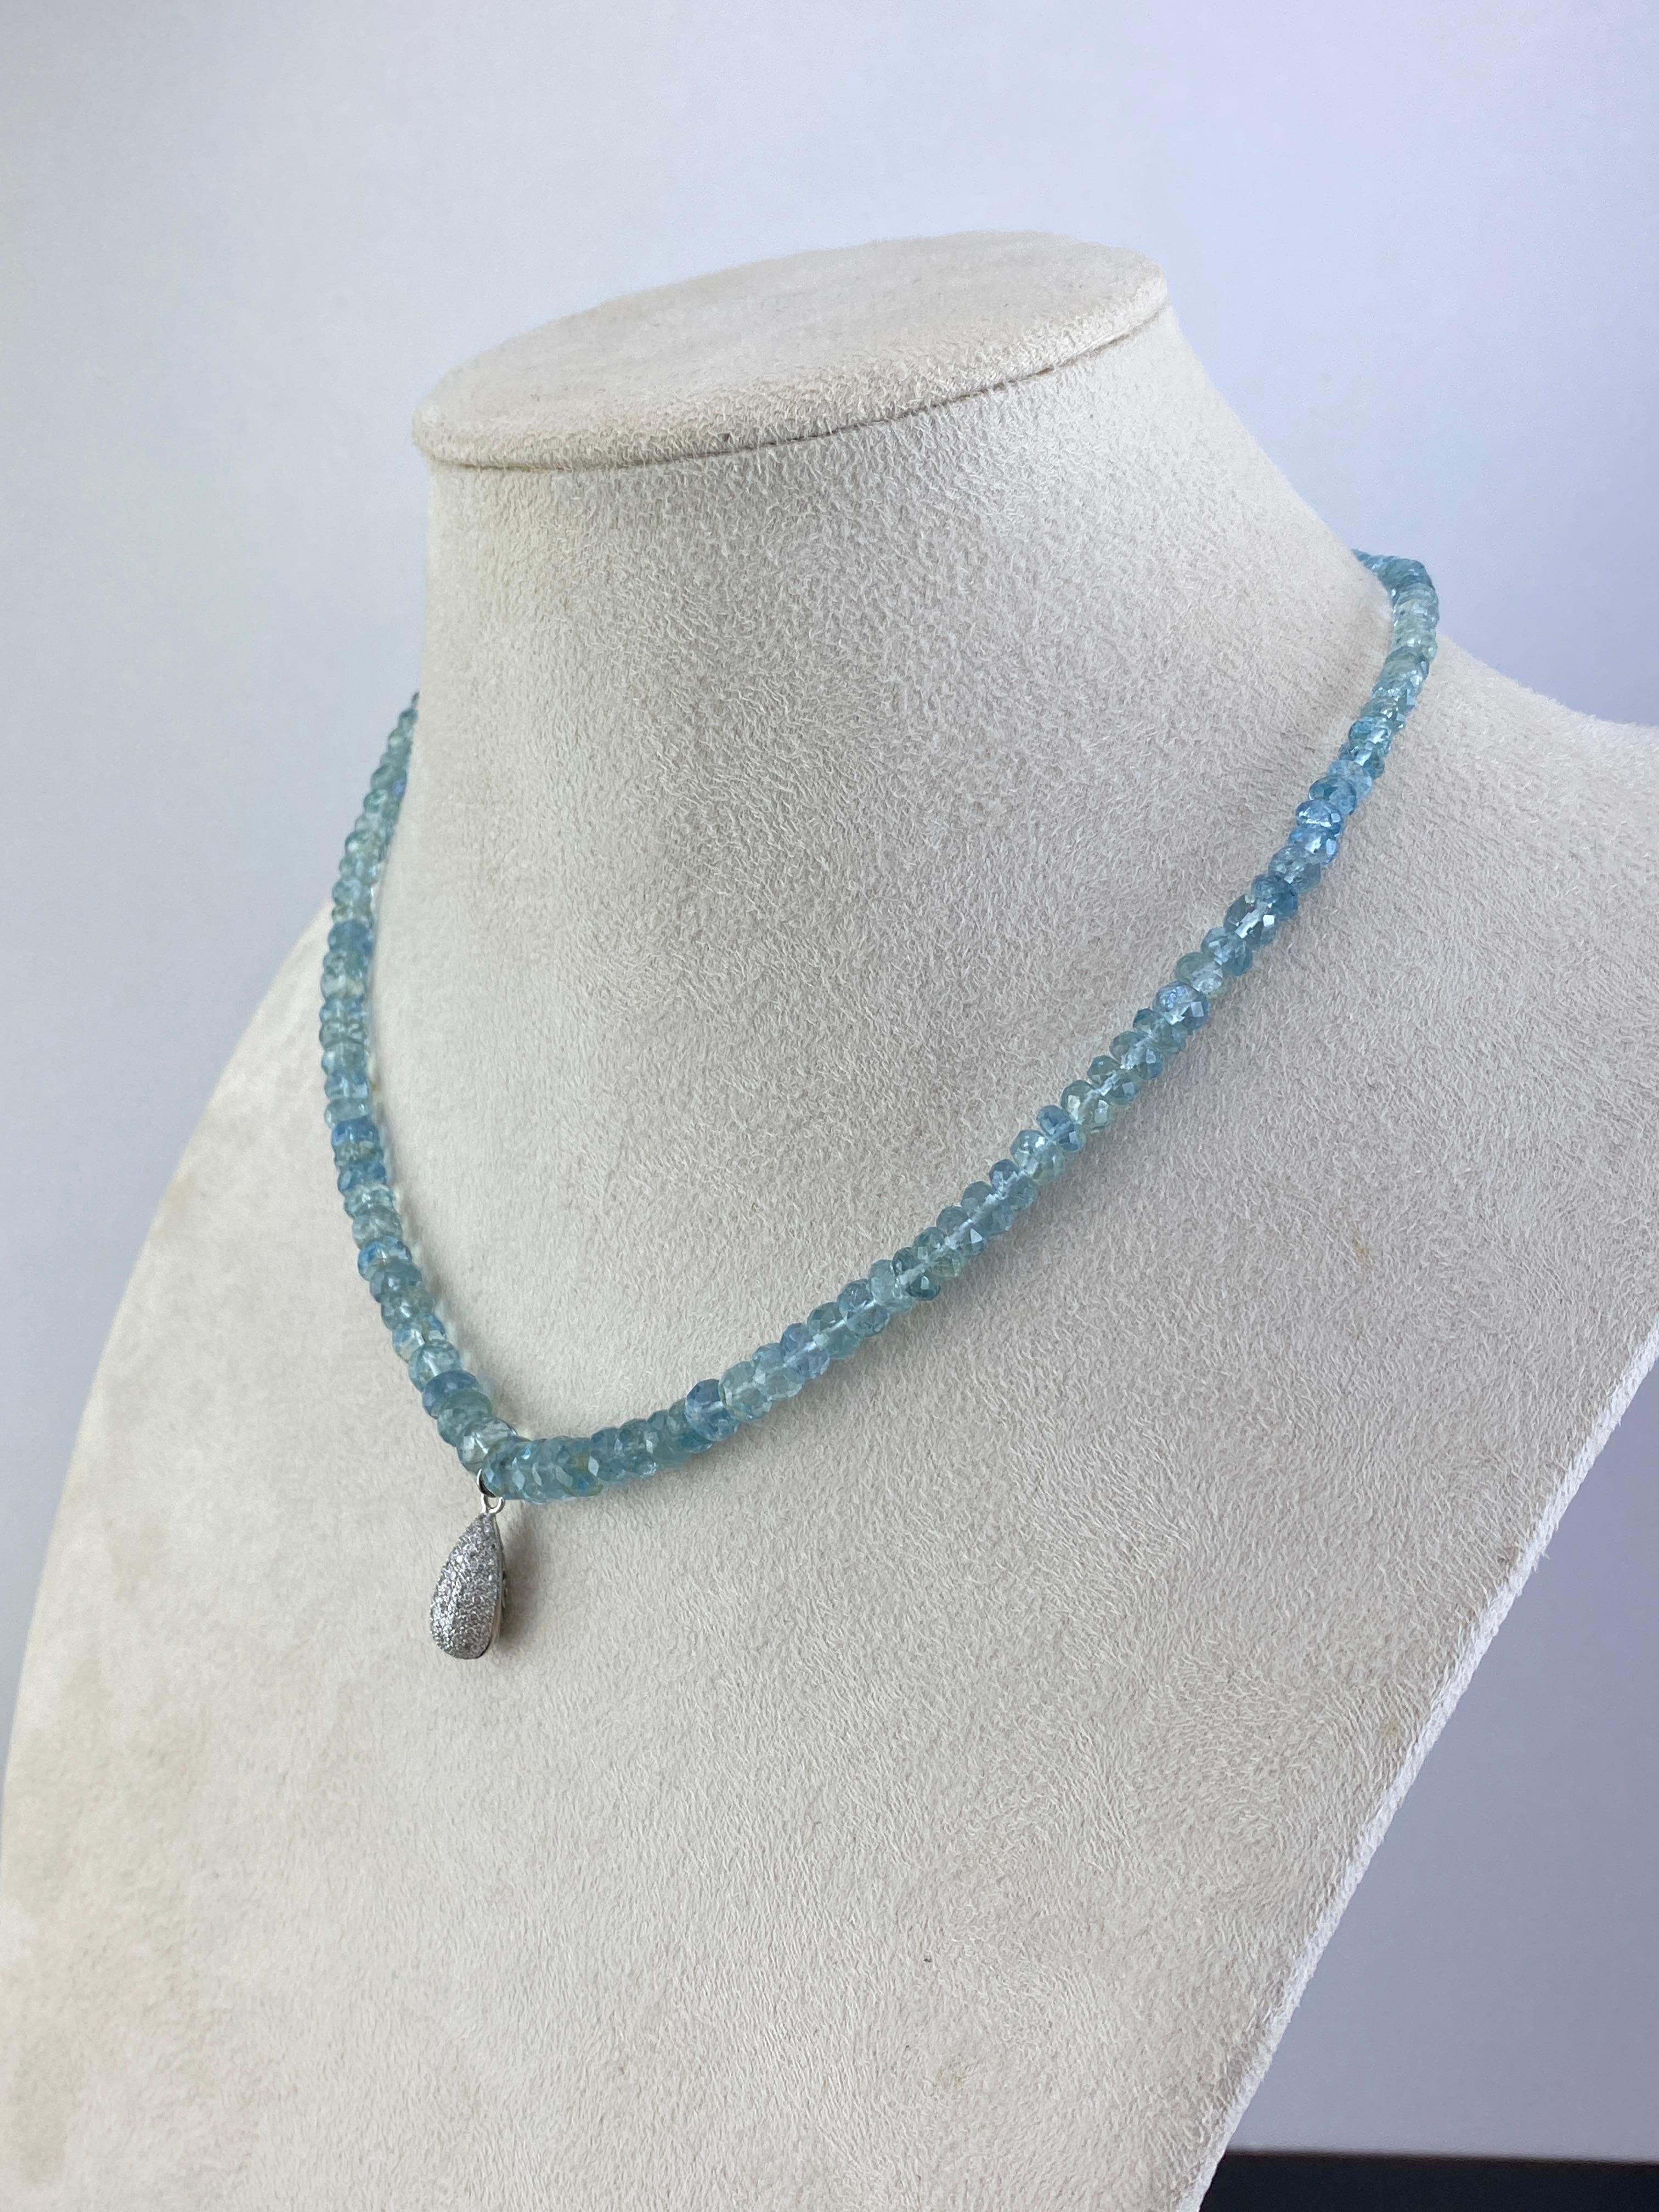 44.77 Carat Aquamarine and Diamond Bead Necklace In New Condition For Sale In Bangkok, Thailand